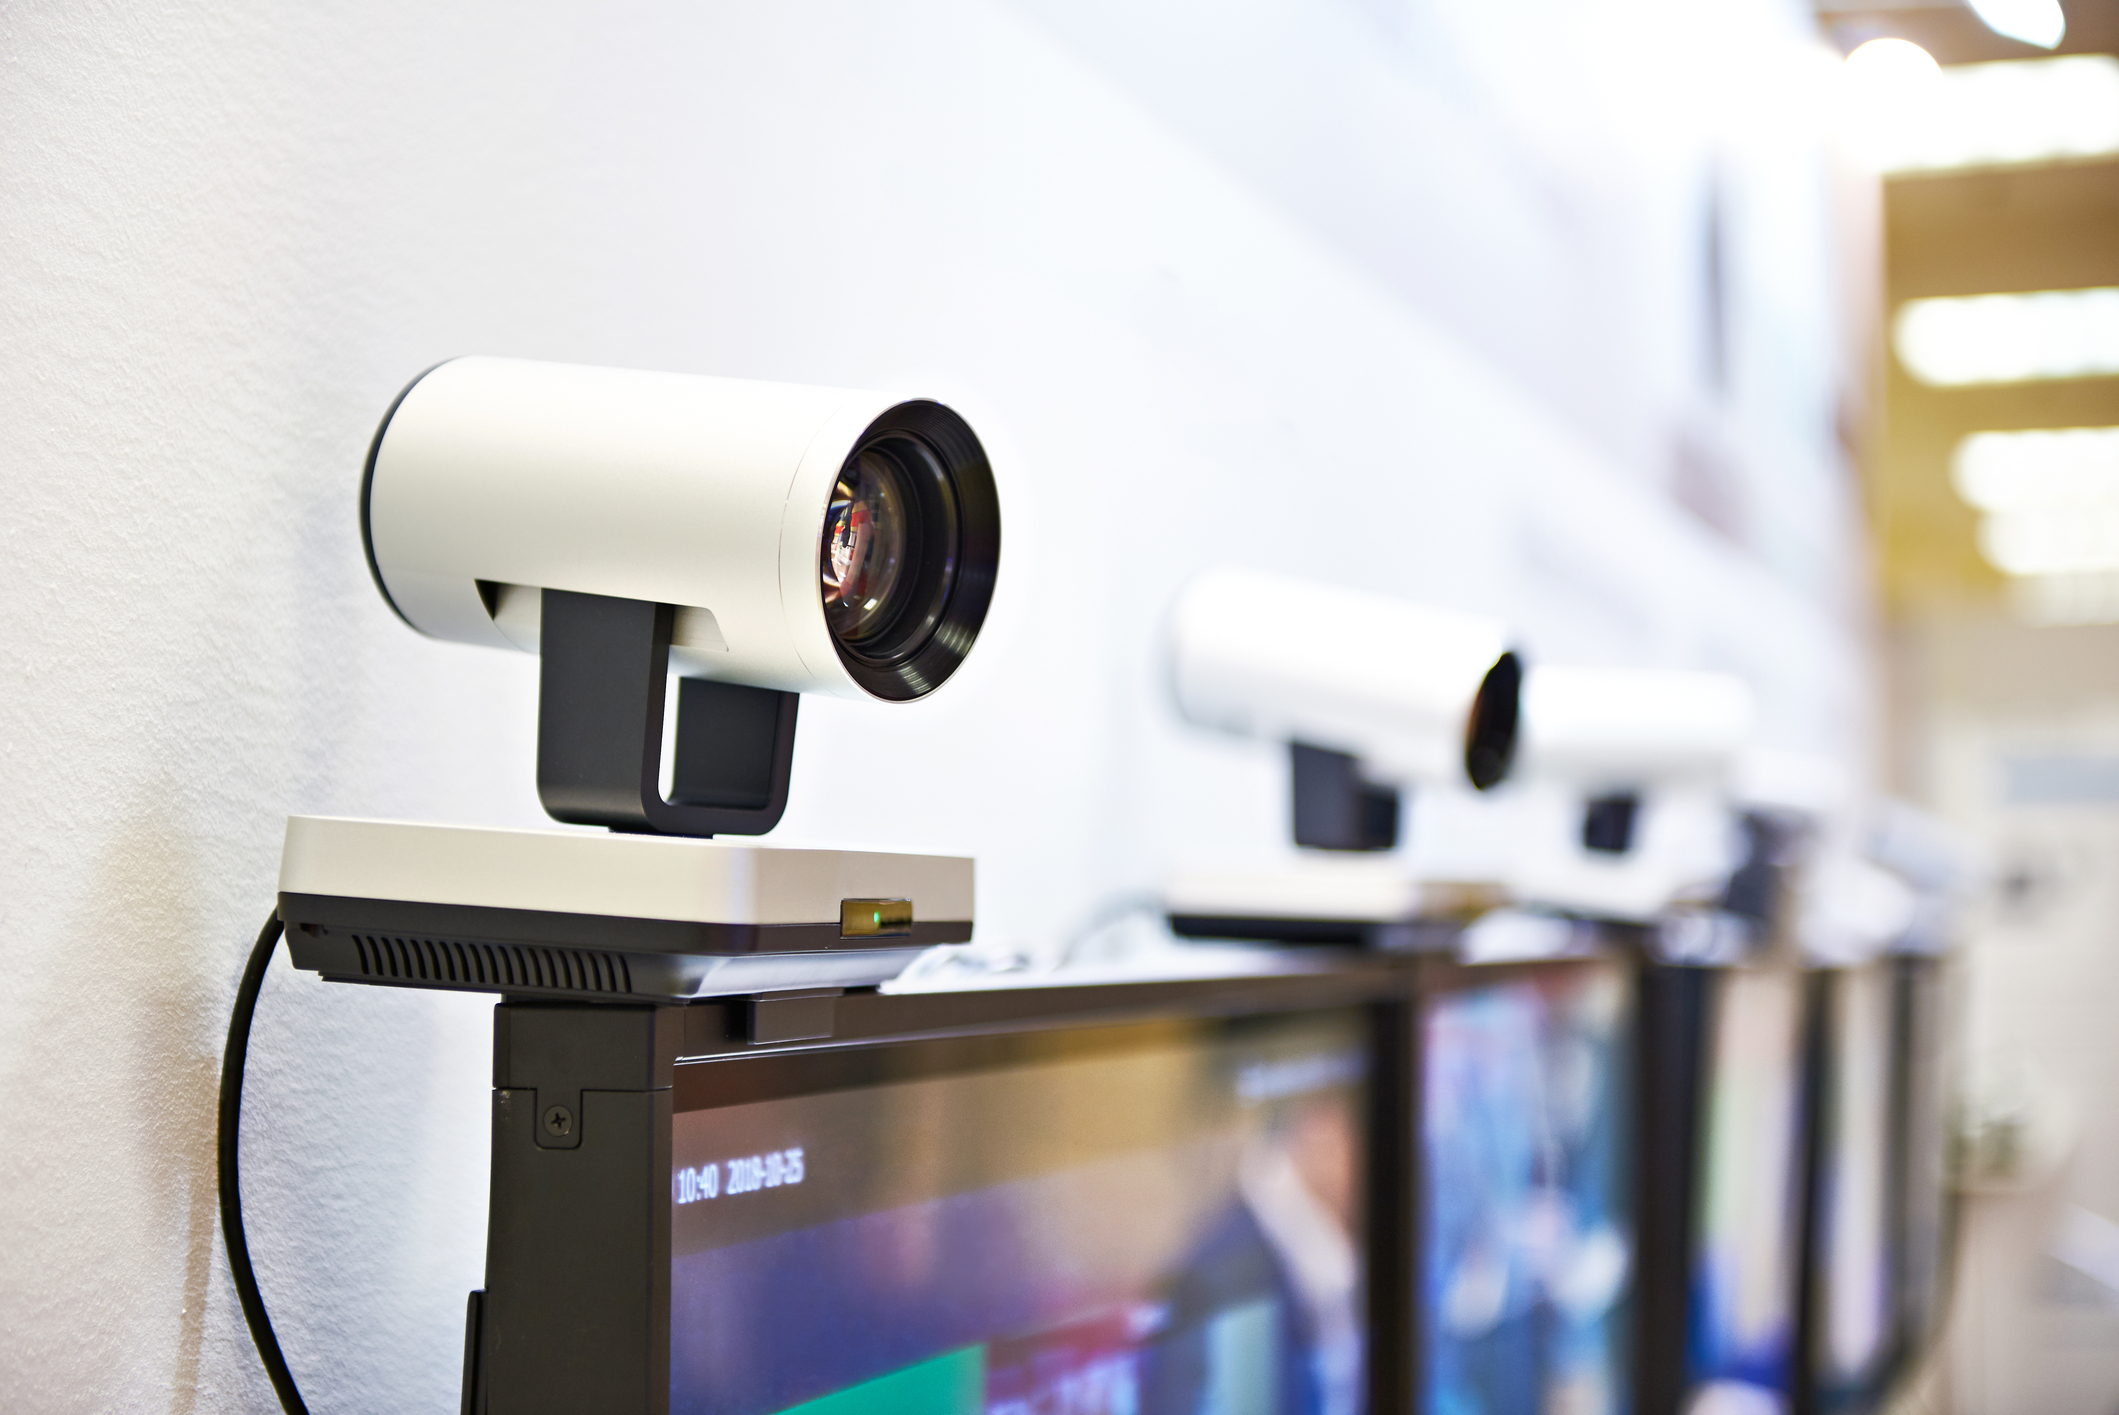 External video camera for video conferencing